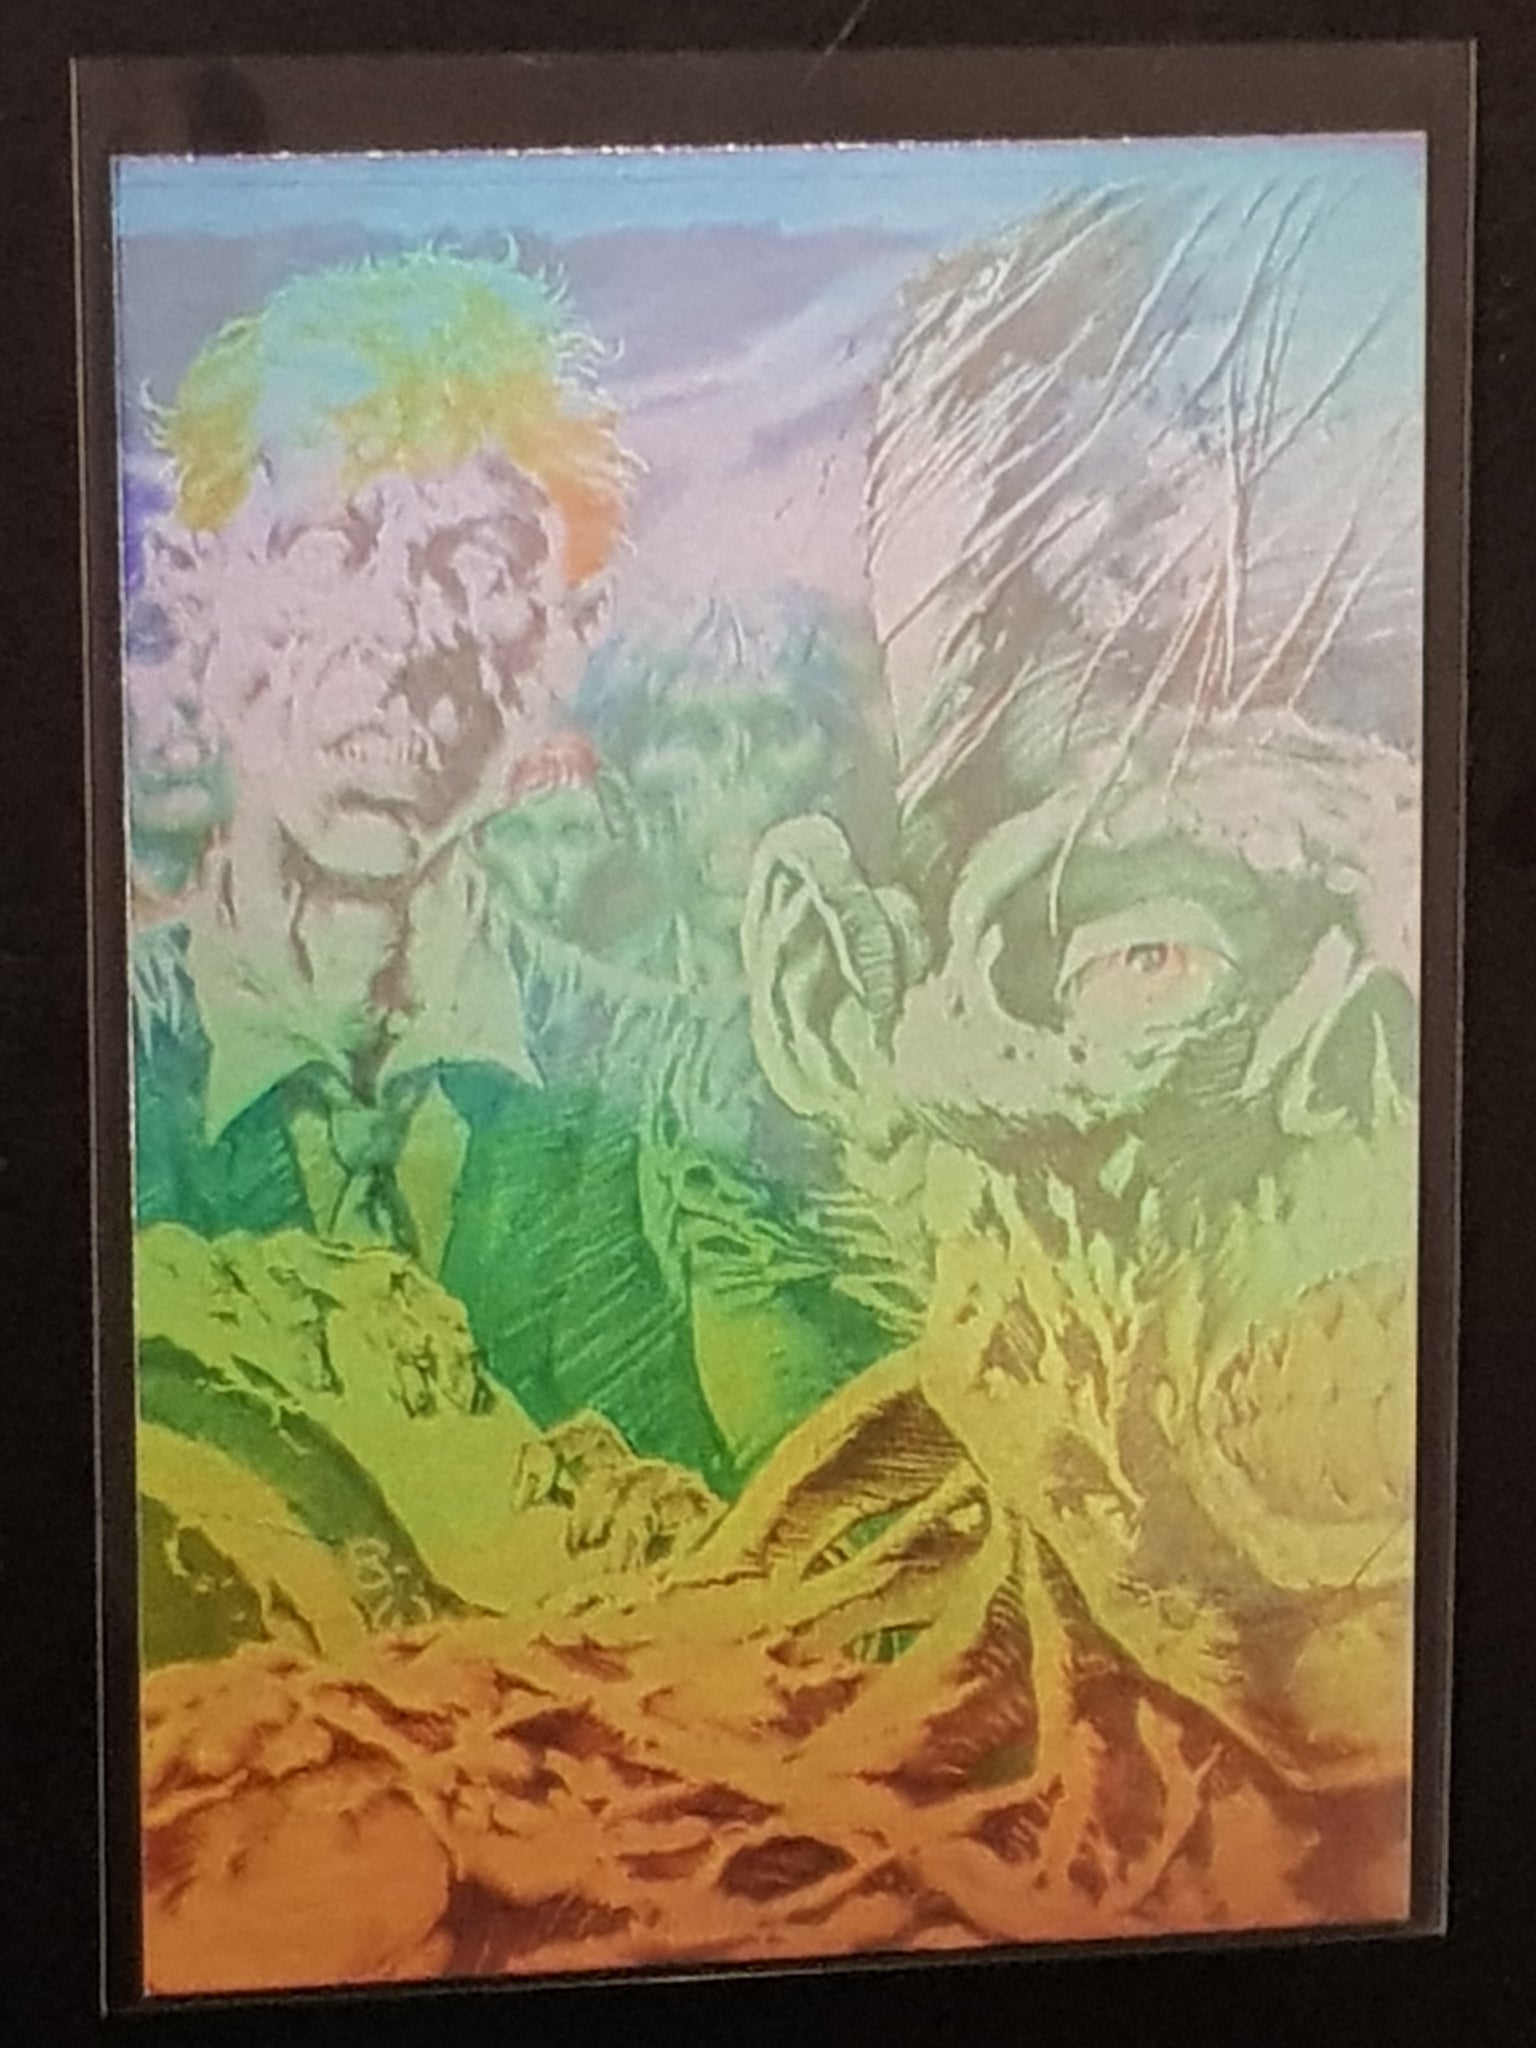 Bernie Wrightson Master of Macabre Series 1 #H3 Hologram Trading Card